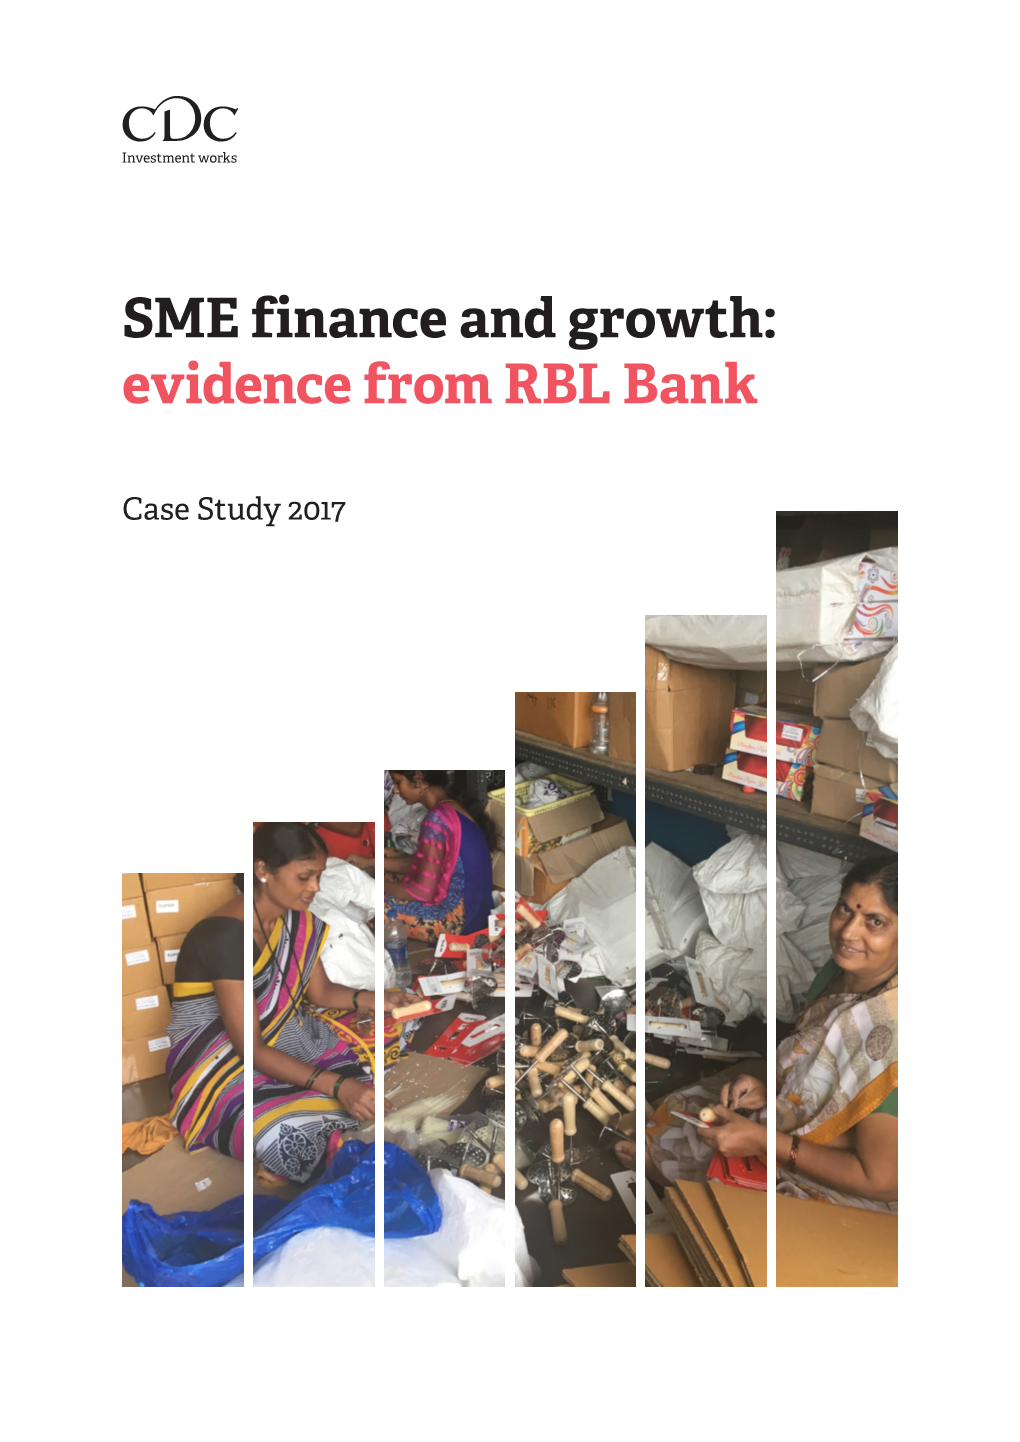 SME Finance and Growth: Evidence from RBL Bank